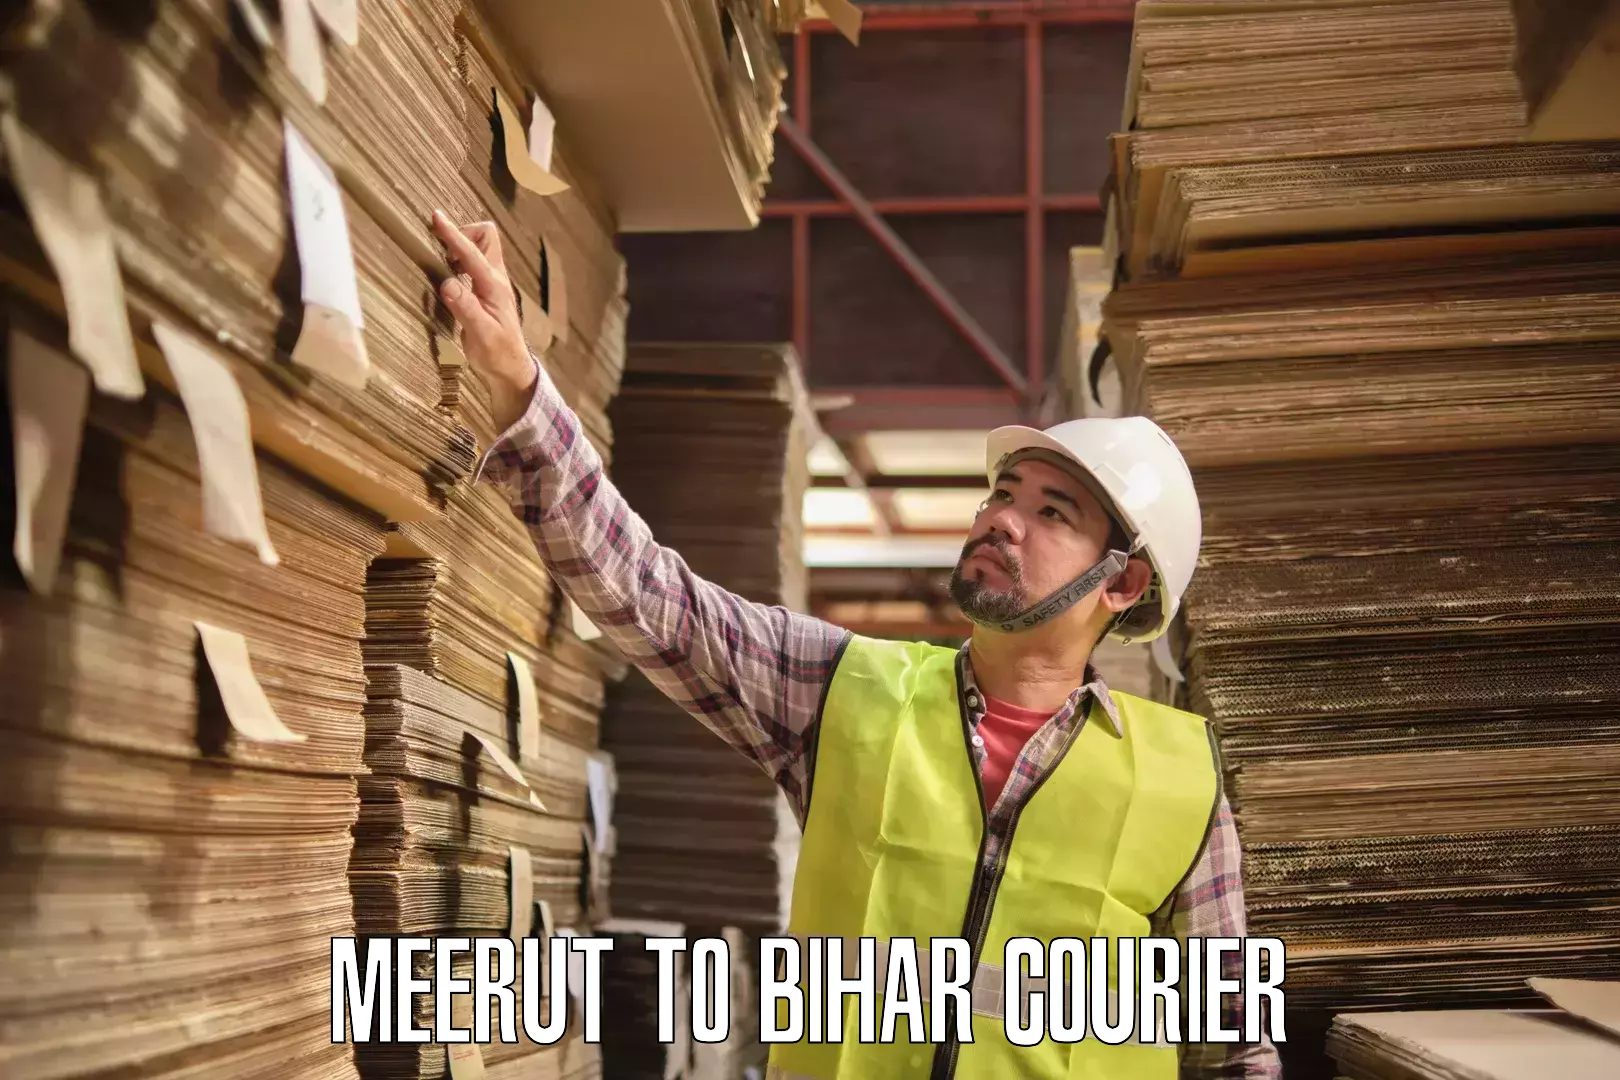 On-call courier service Meerut to Madhubani